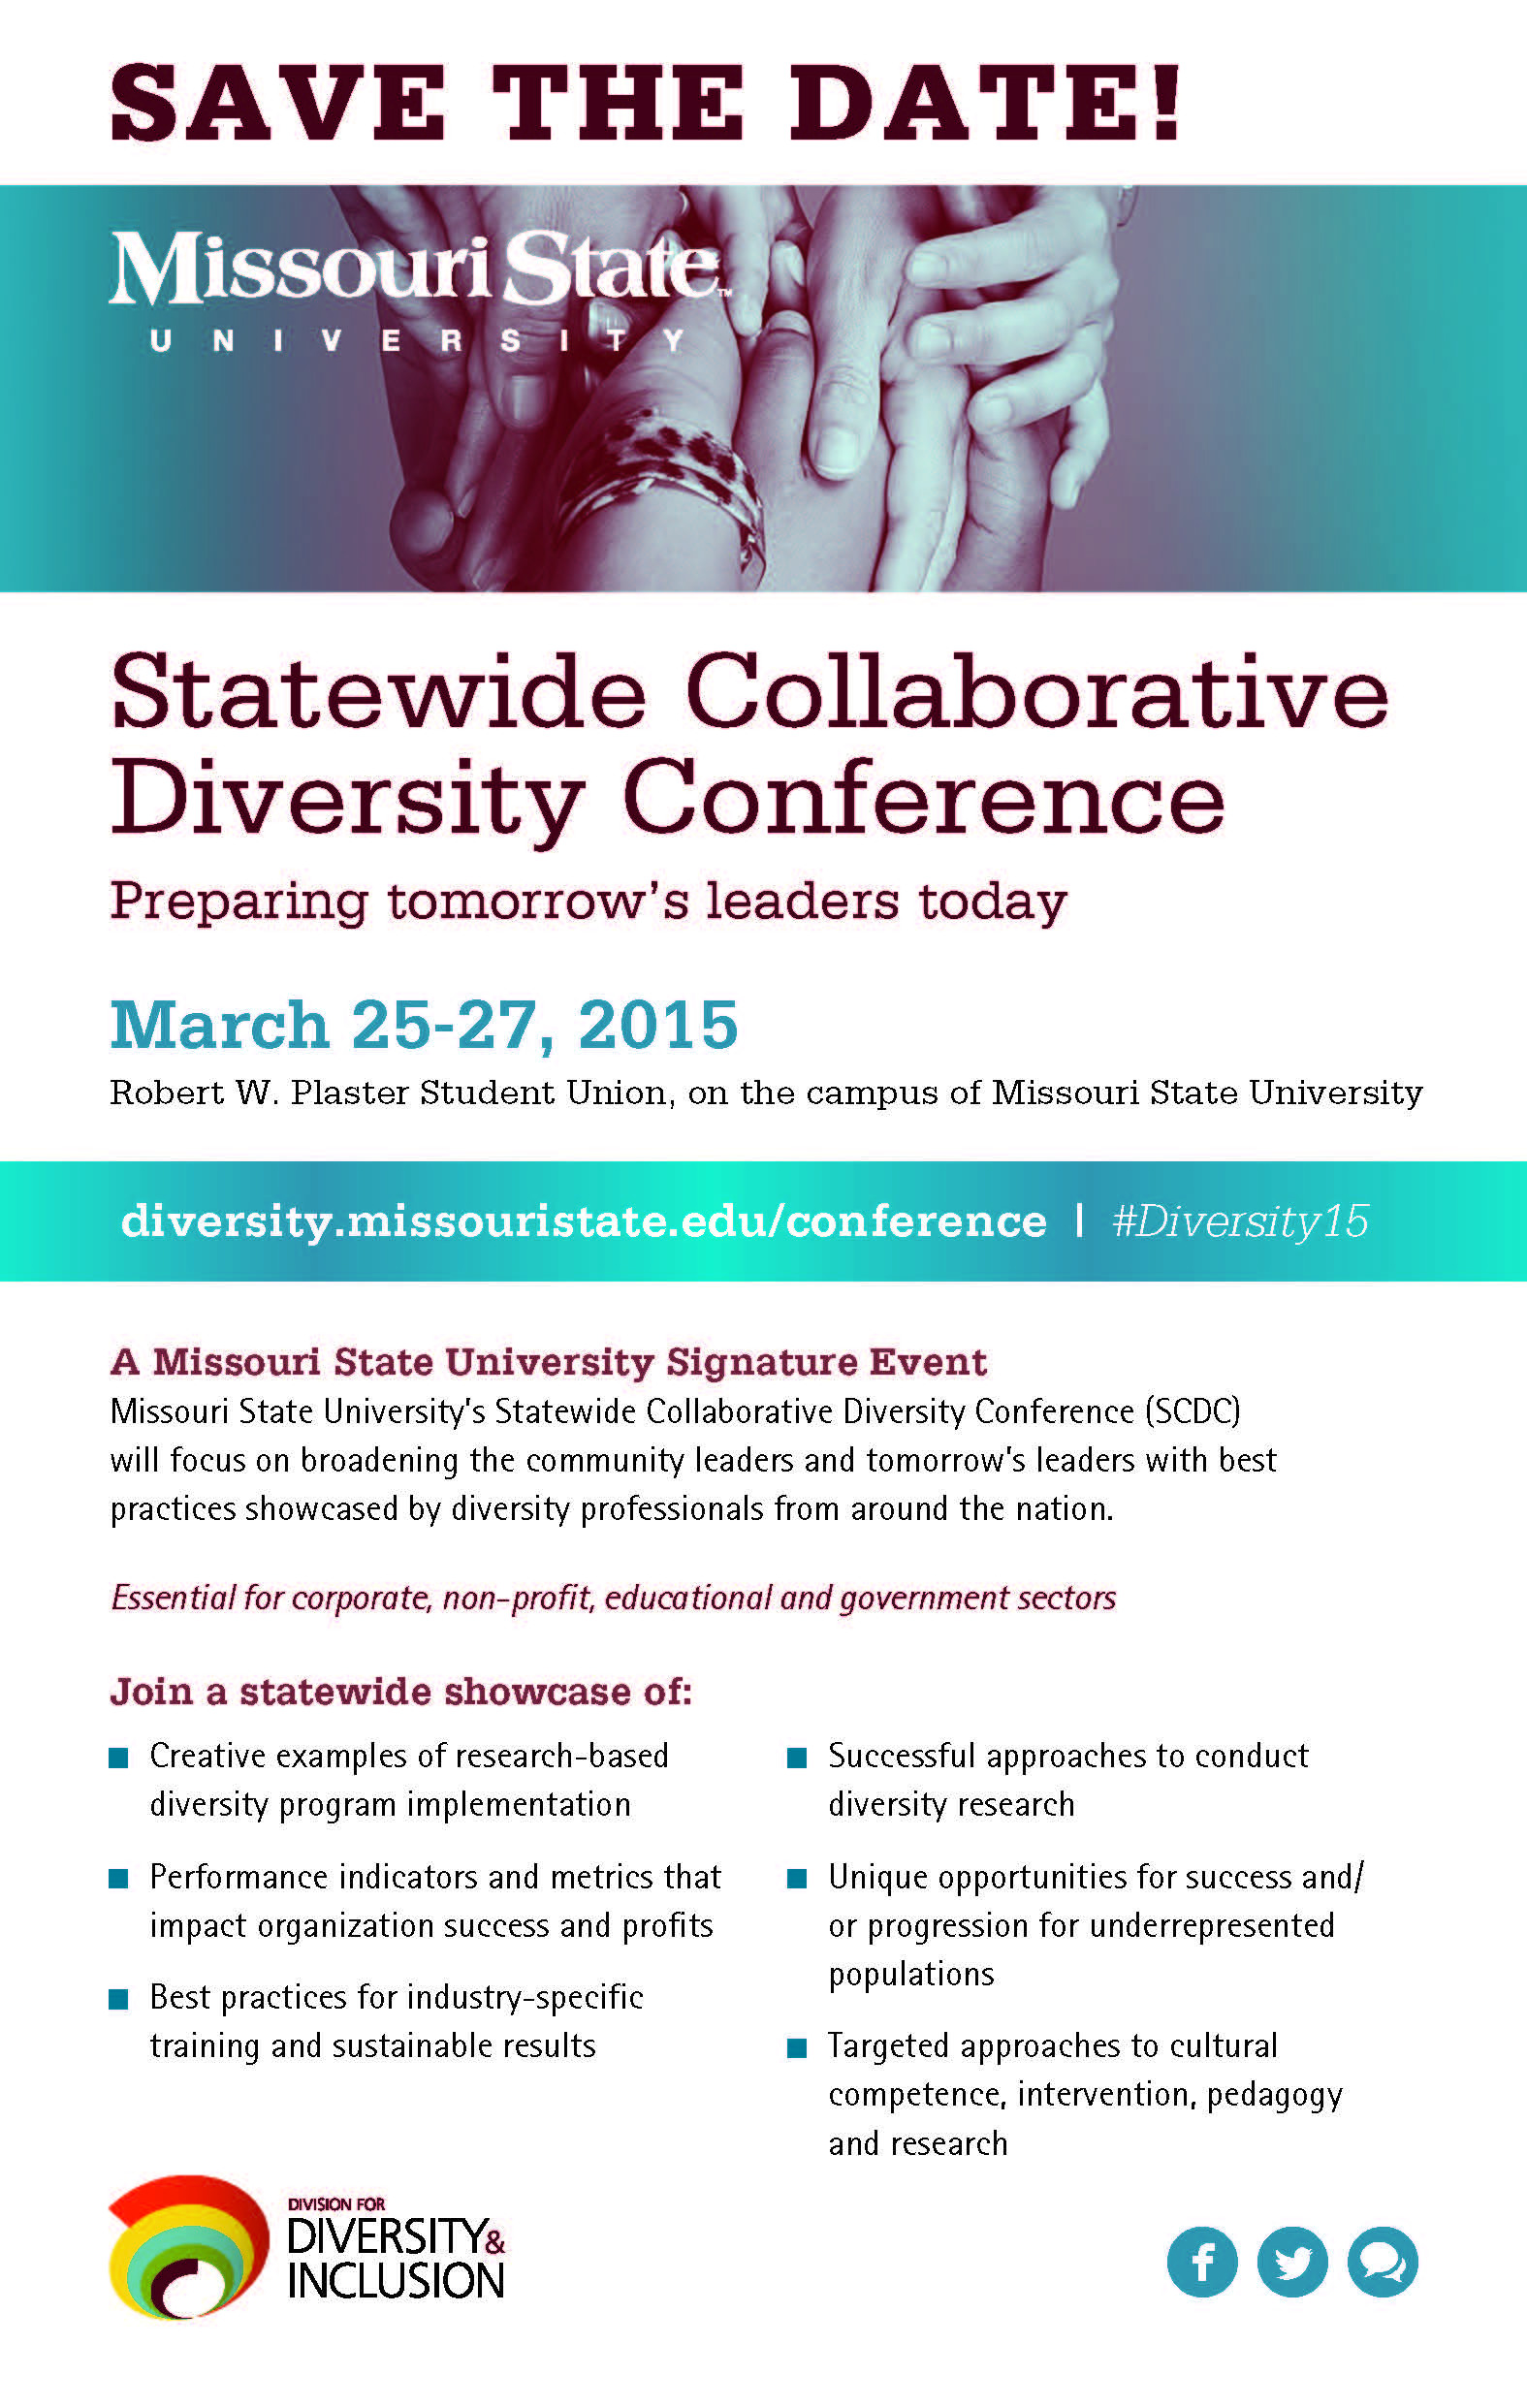 Save the Date: 2015 Statewide Collaborative Diversity Conference